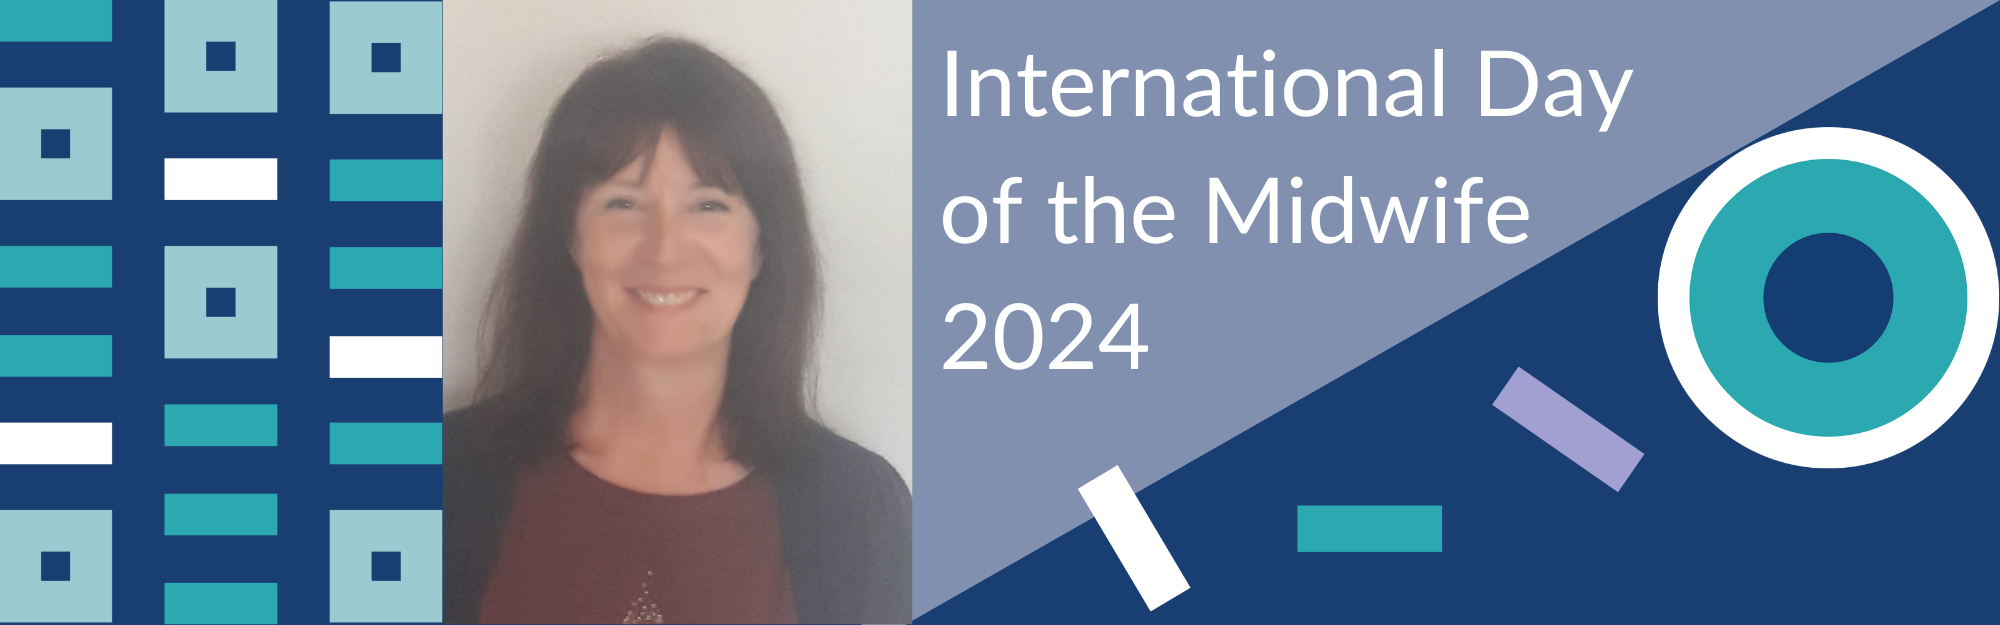 Donna Underwood International Day of the Midwife 2024